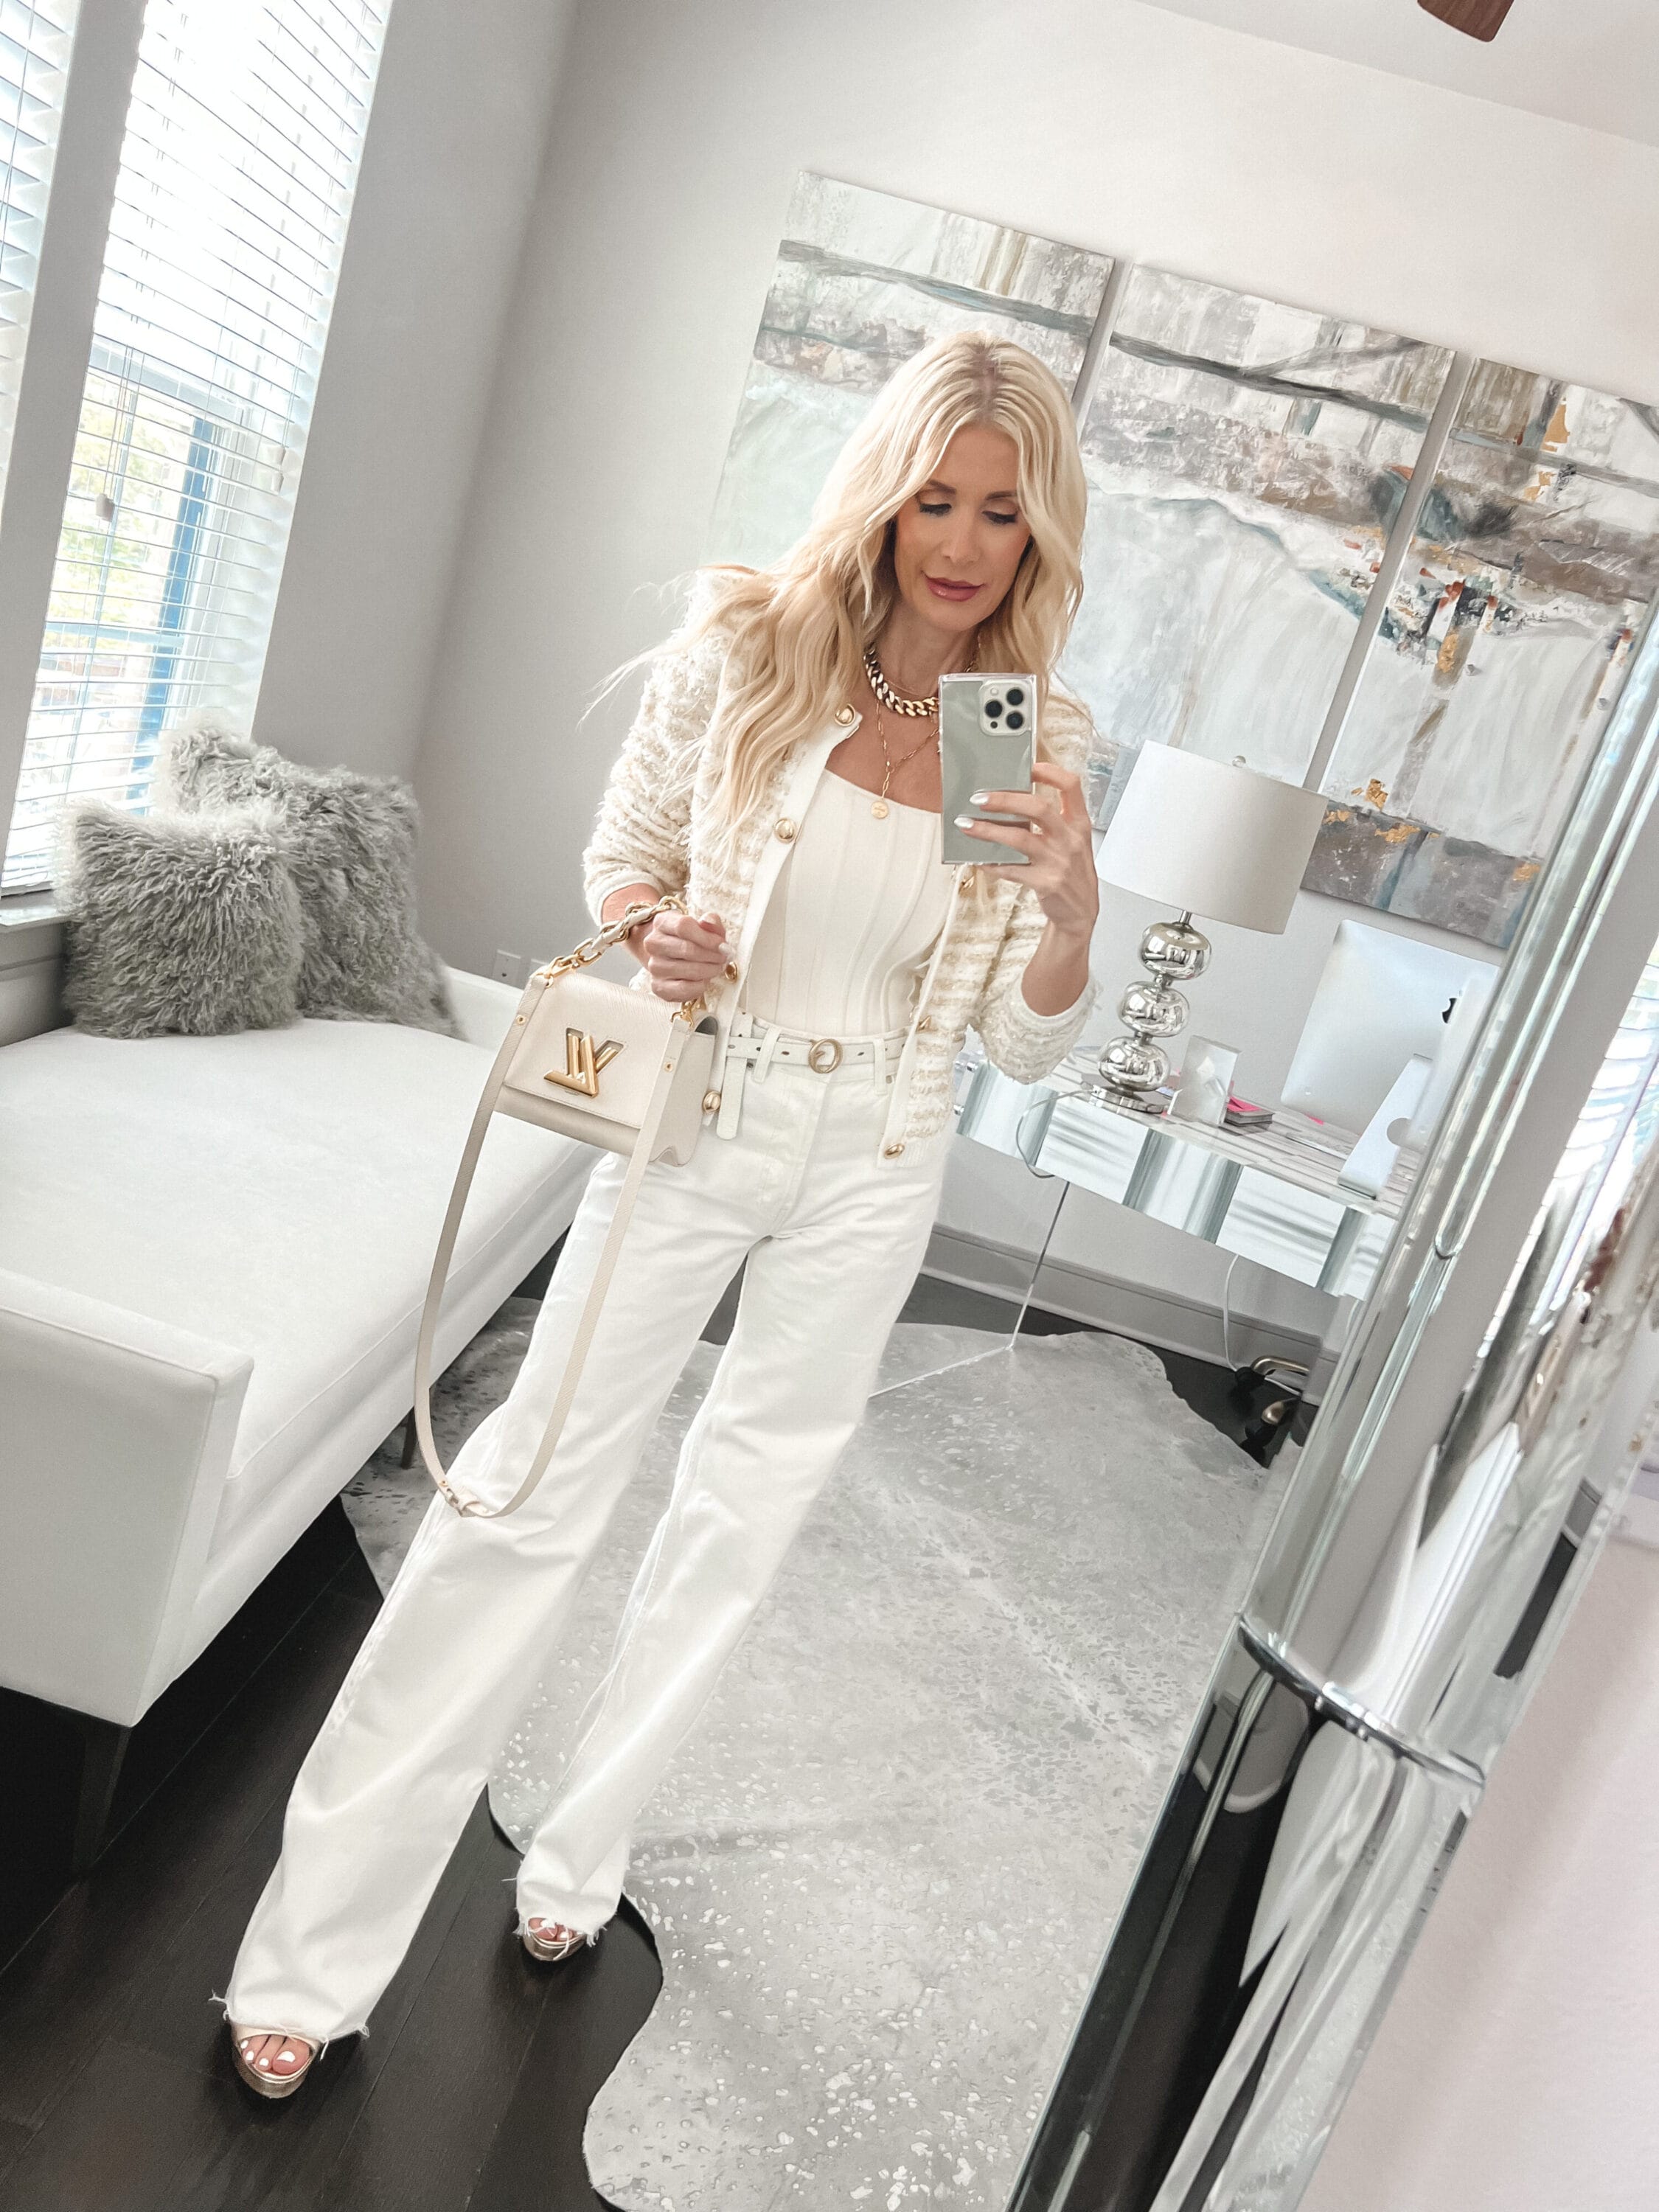 Dallas fashion influencer wearing ivory denim with a Chanel inspired sweater jacket.